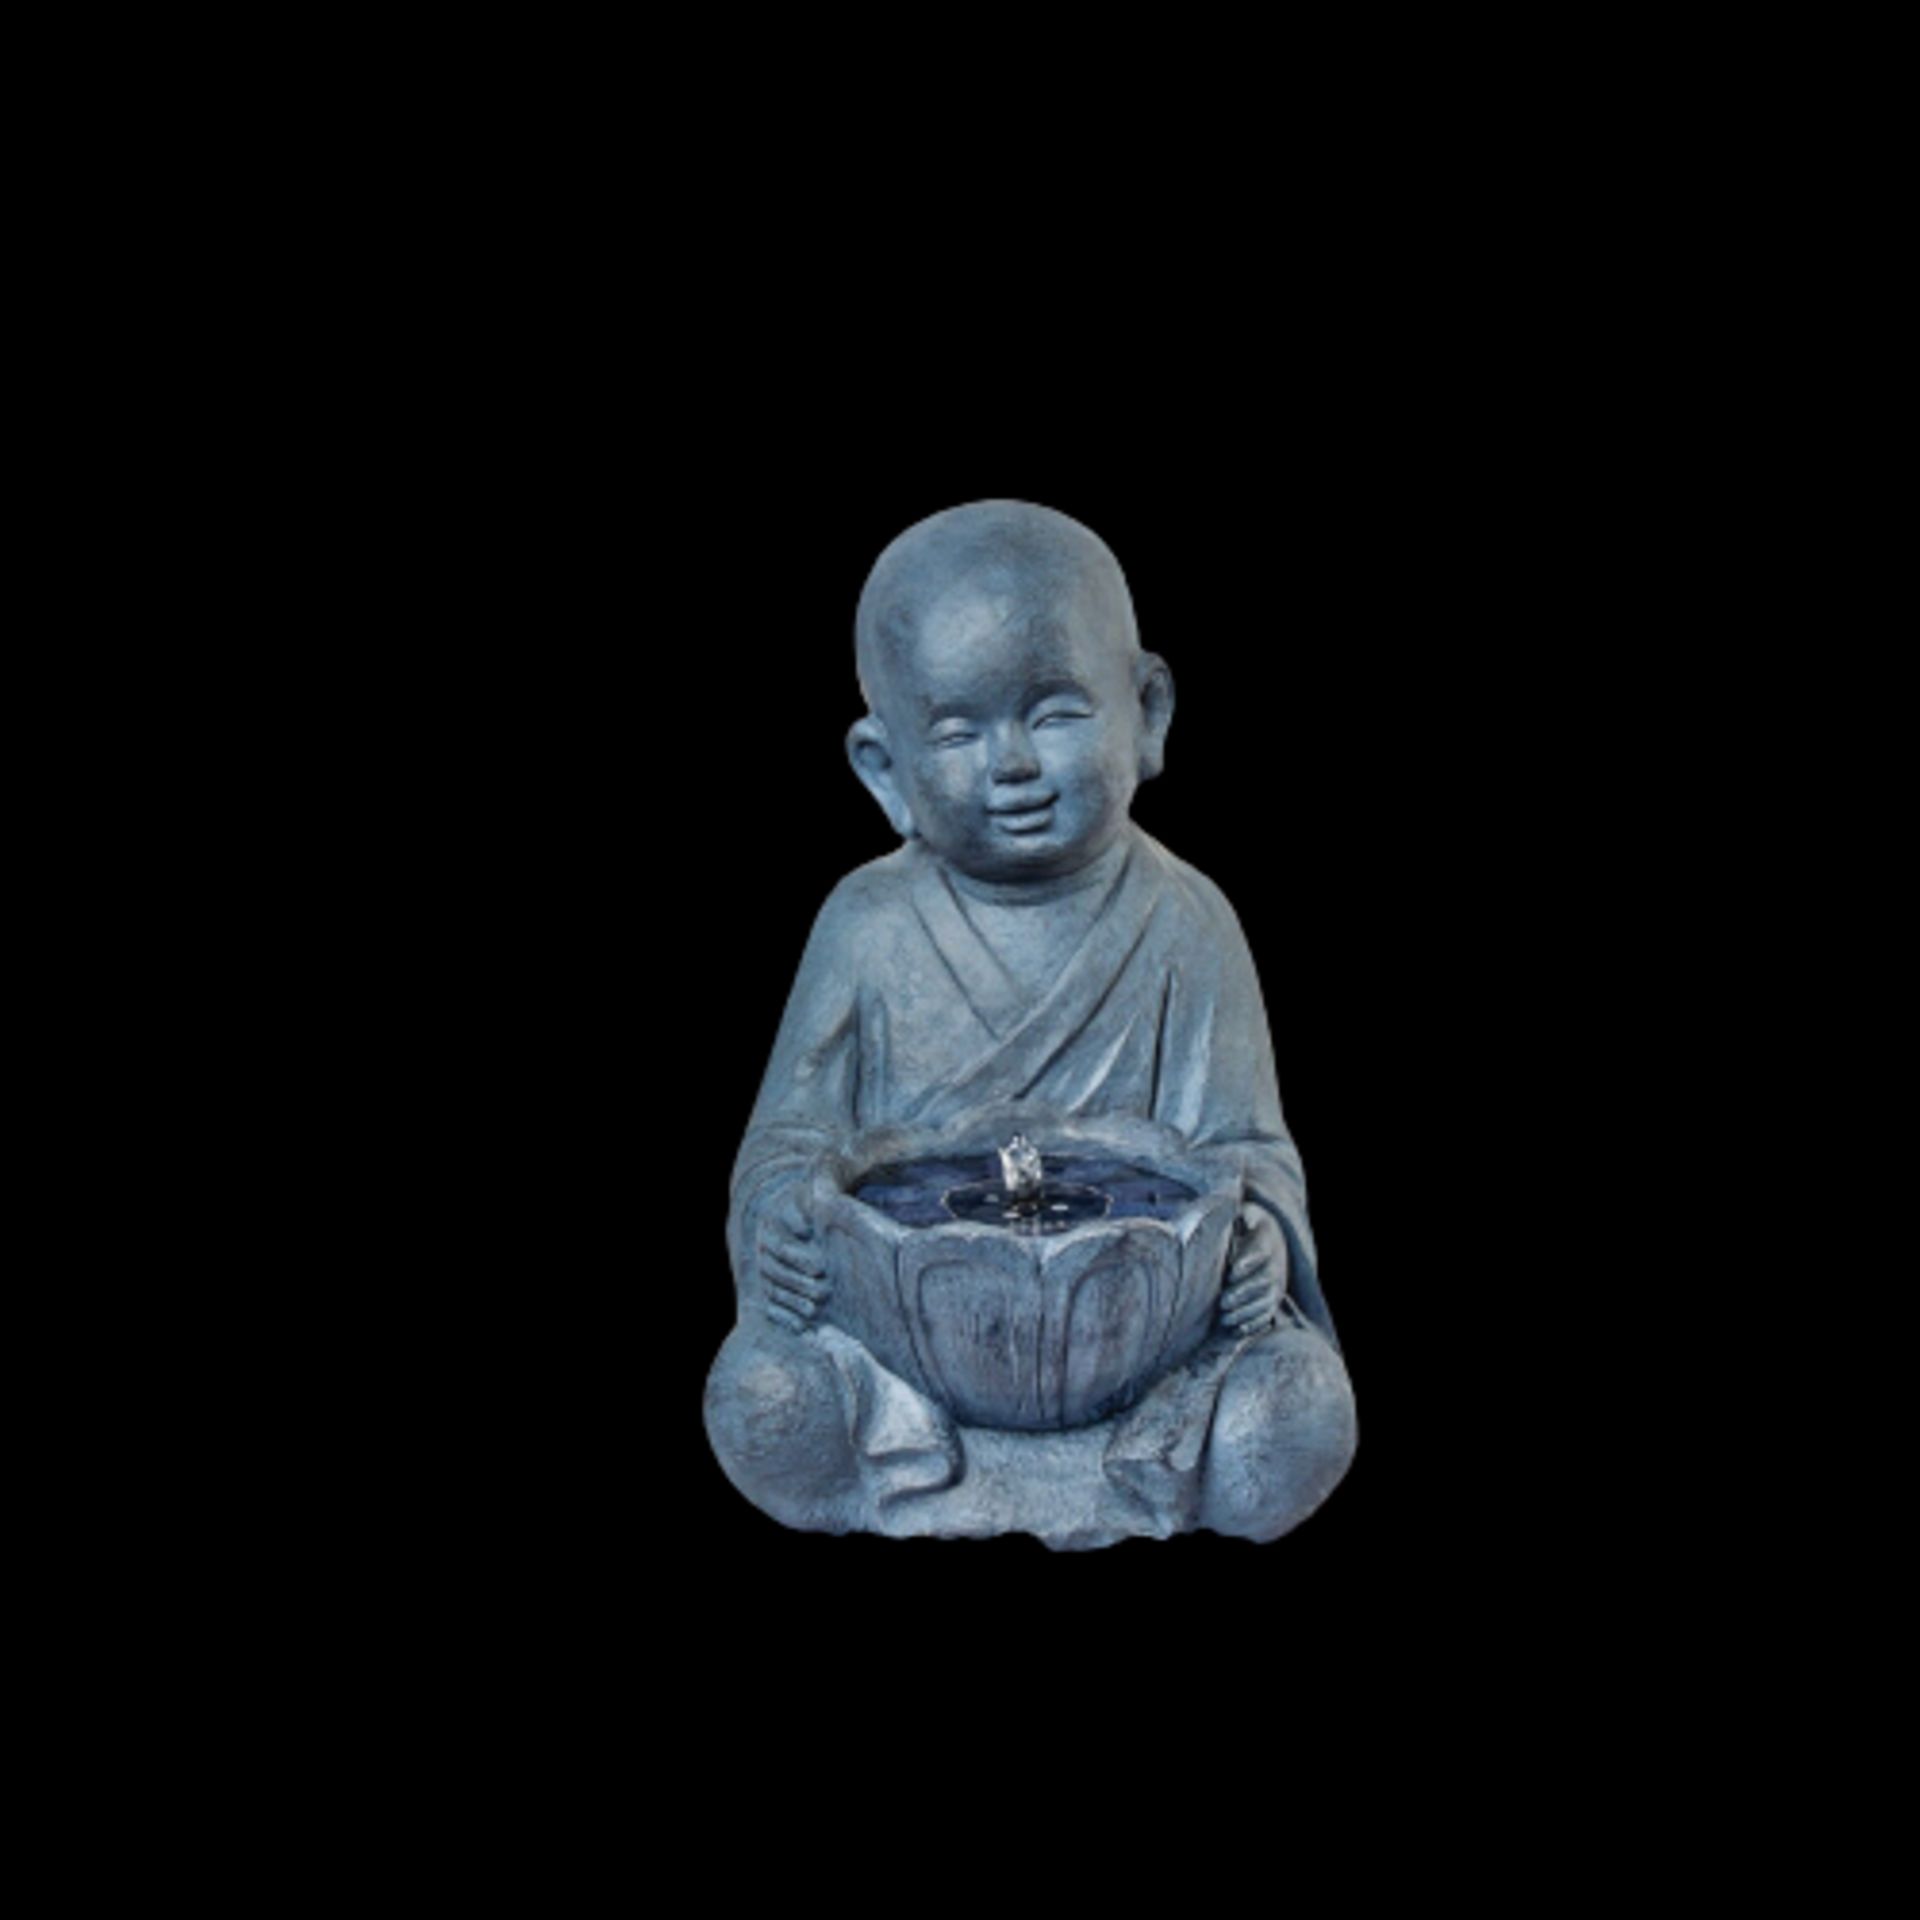 BRAND NEW BABY BUDDHA WATER FEATURE SOLAR ON DEMAND WITH WARM WHITE LED LIGHTS - Image 2 of 4